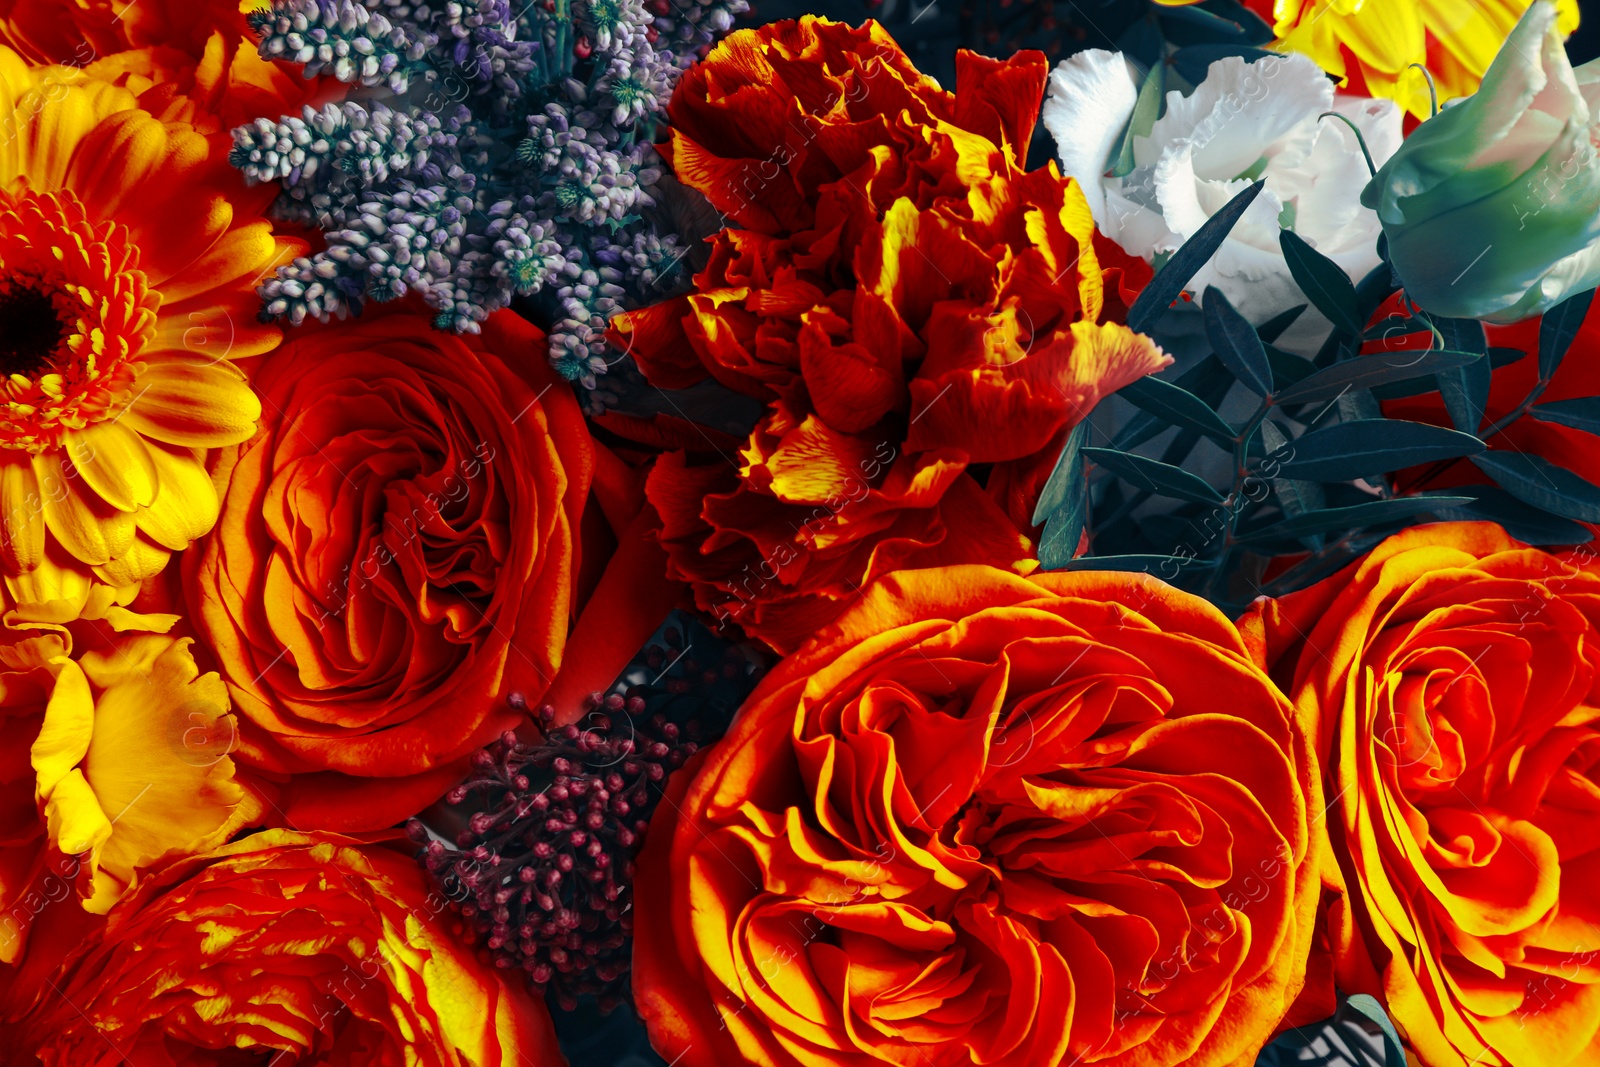 Image of Beautiful bouquet with orange flowers as background, closeup